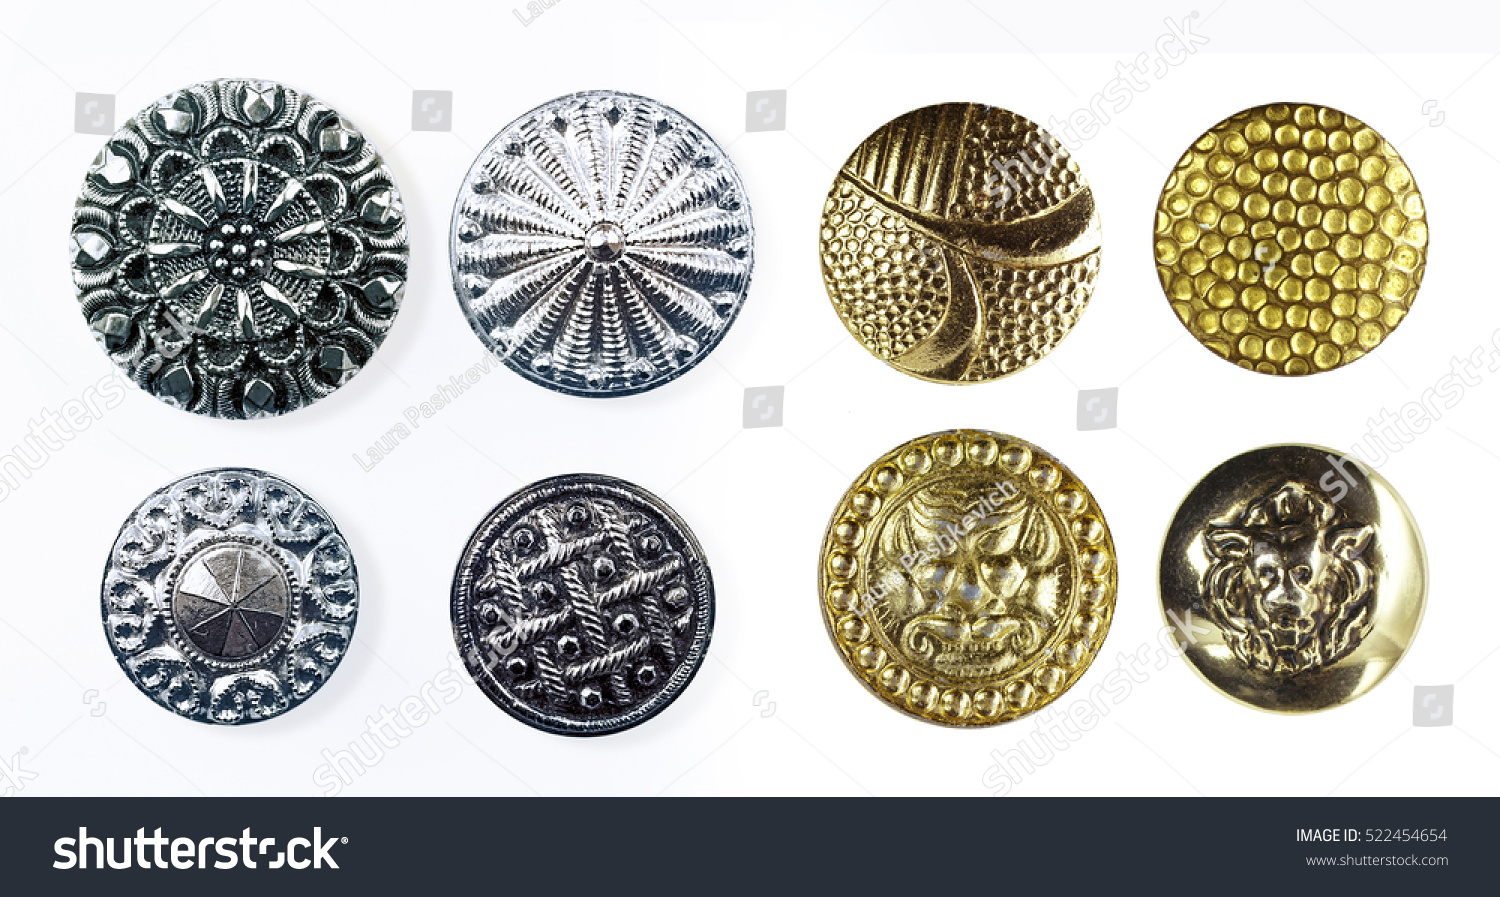 3,513 Silver sewing buttons Images, Stock Photos & Vectors | Shutterstock